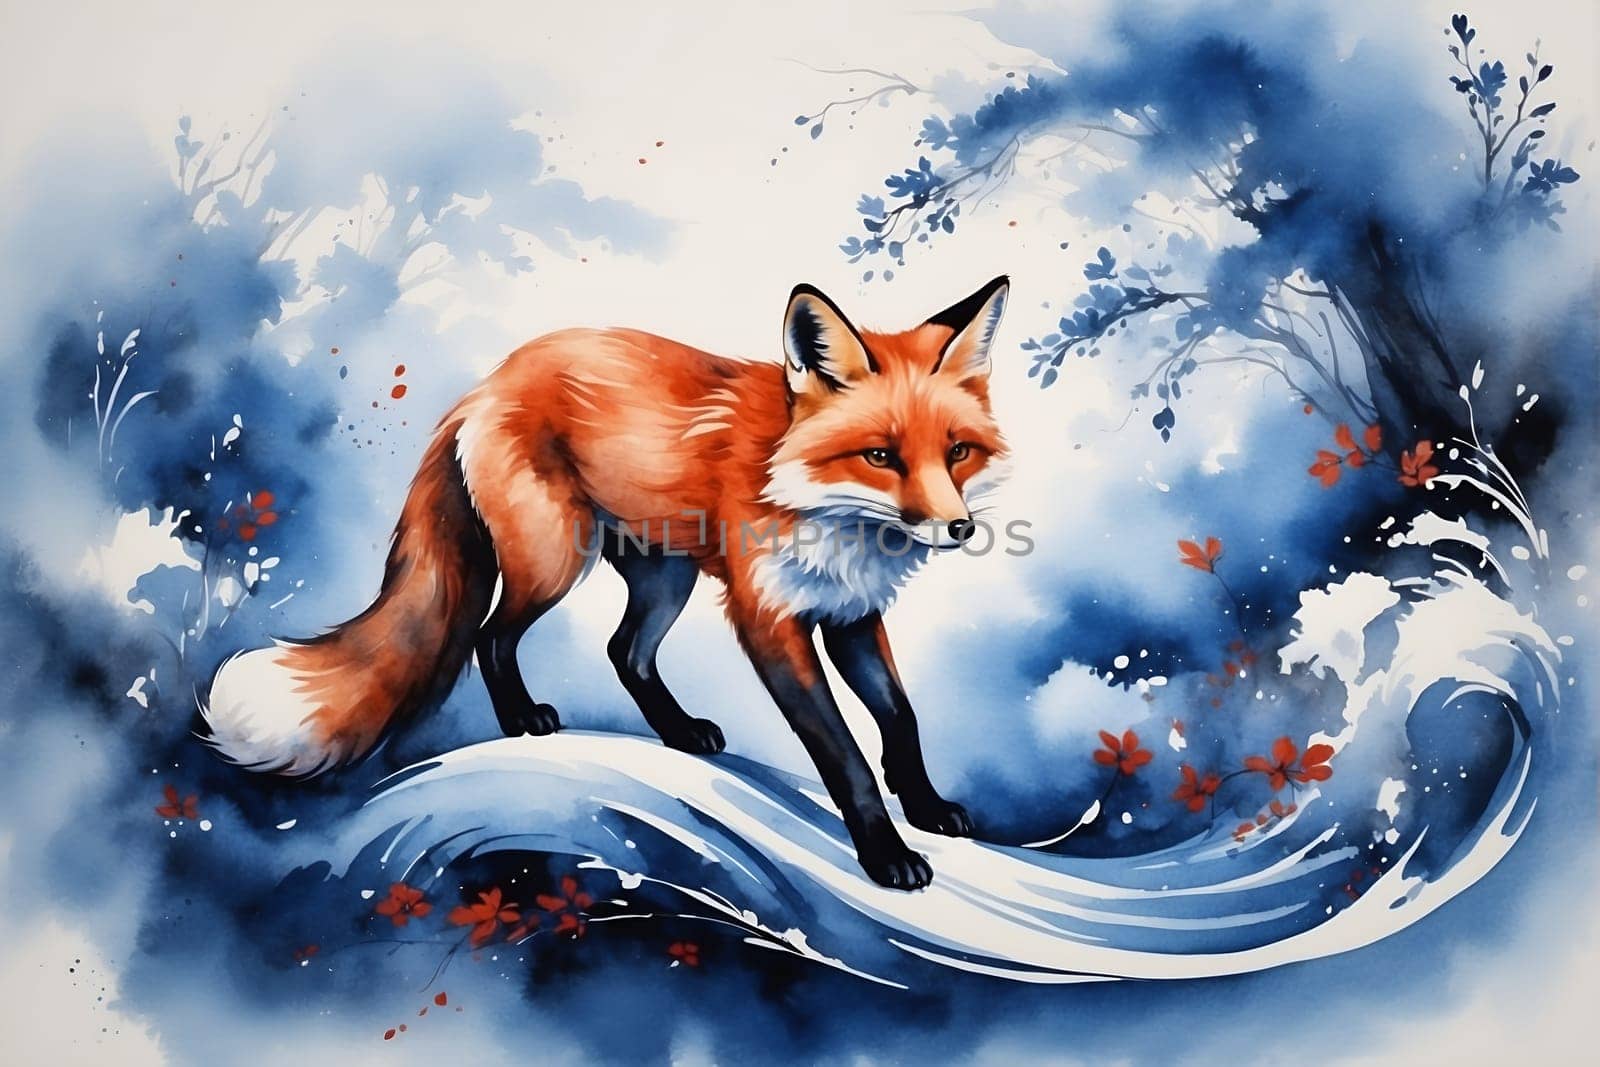 A painting depicting a fox standing on a wave, showcasing the captivating and unique combination of a terrestrial animal in an aquatic setting.